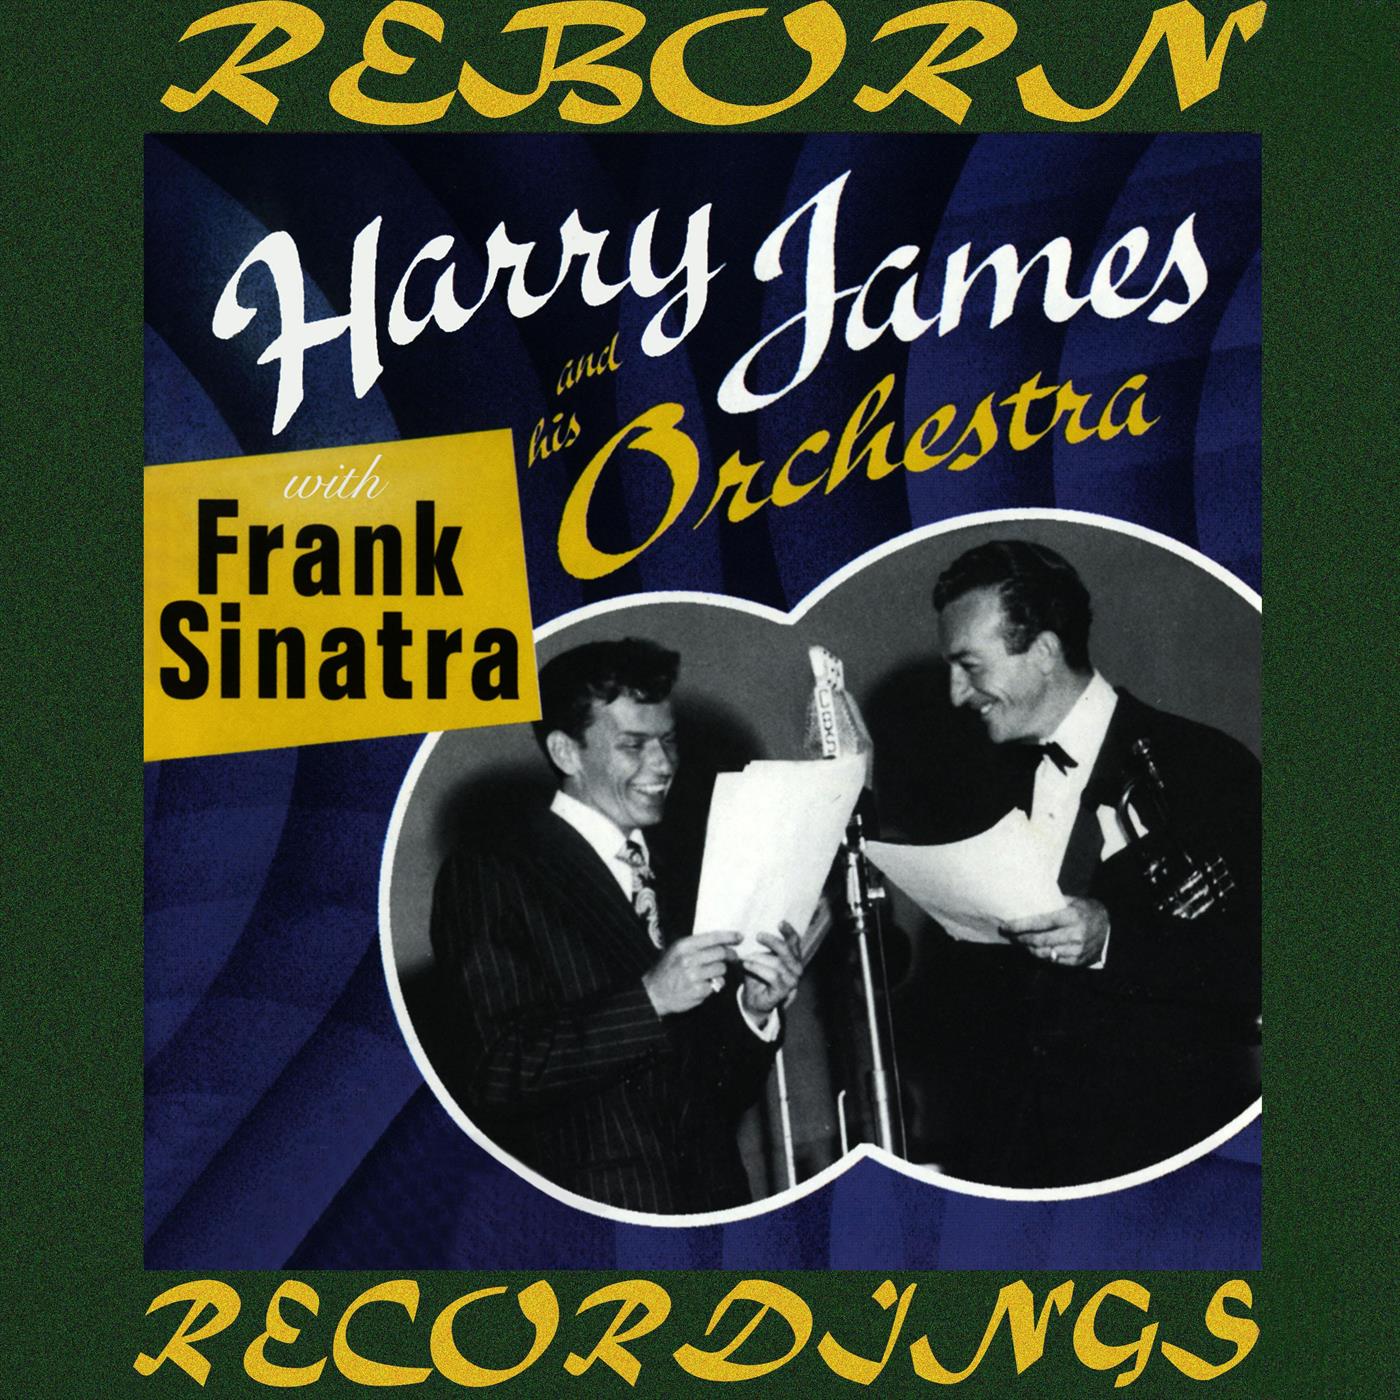 Harry James and His Orchestra with Frank Sinatra  (HD Remastered)